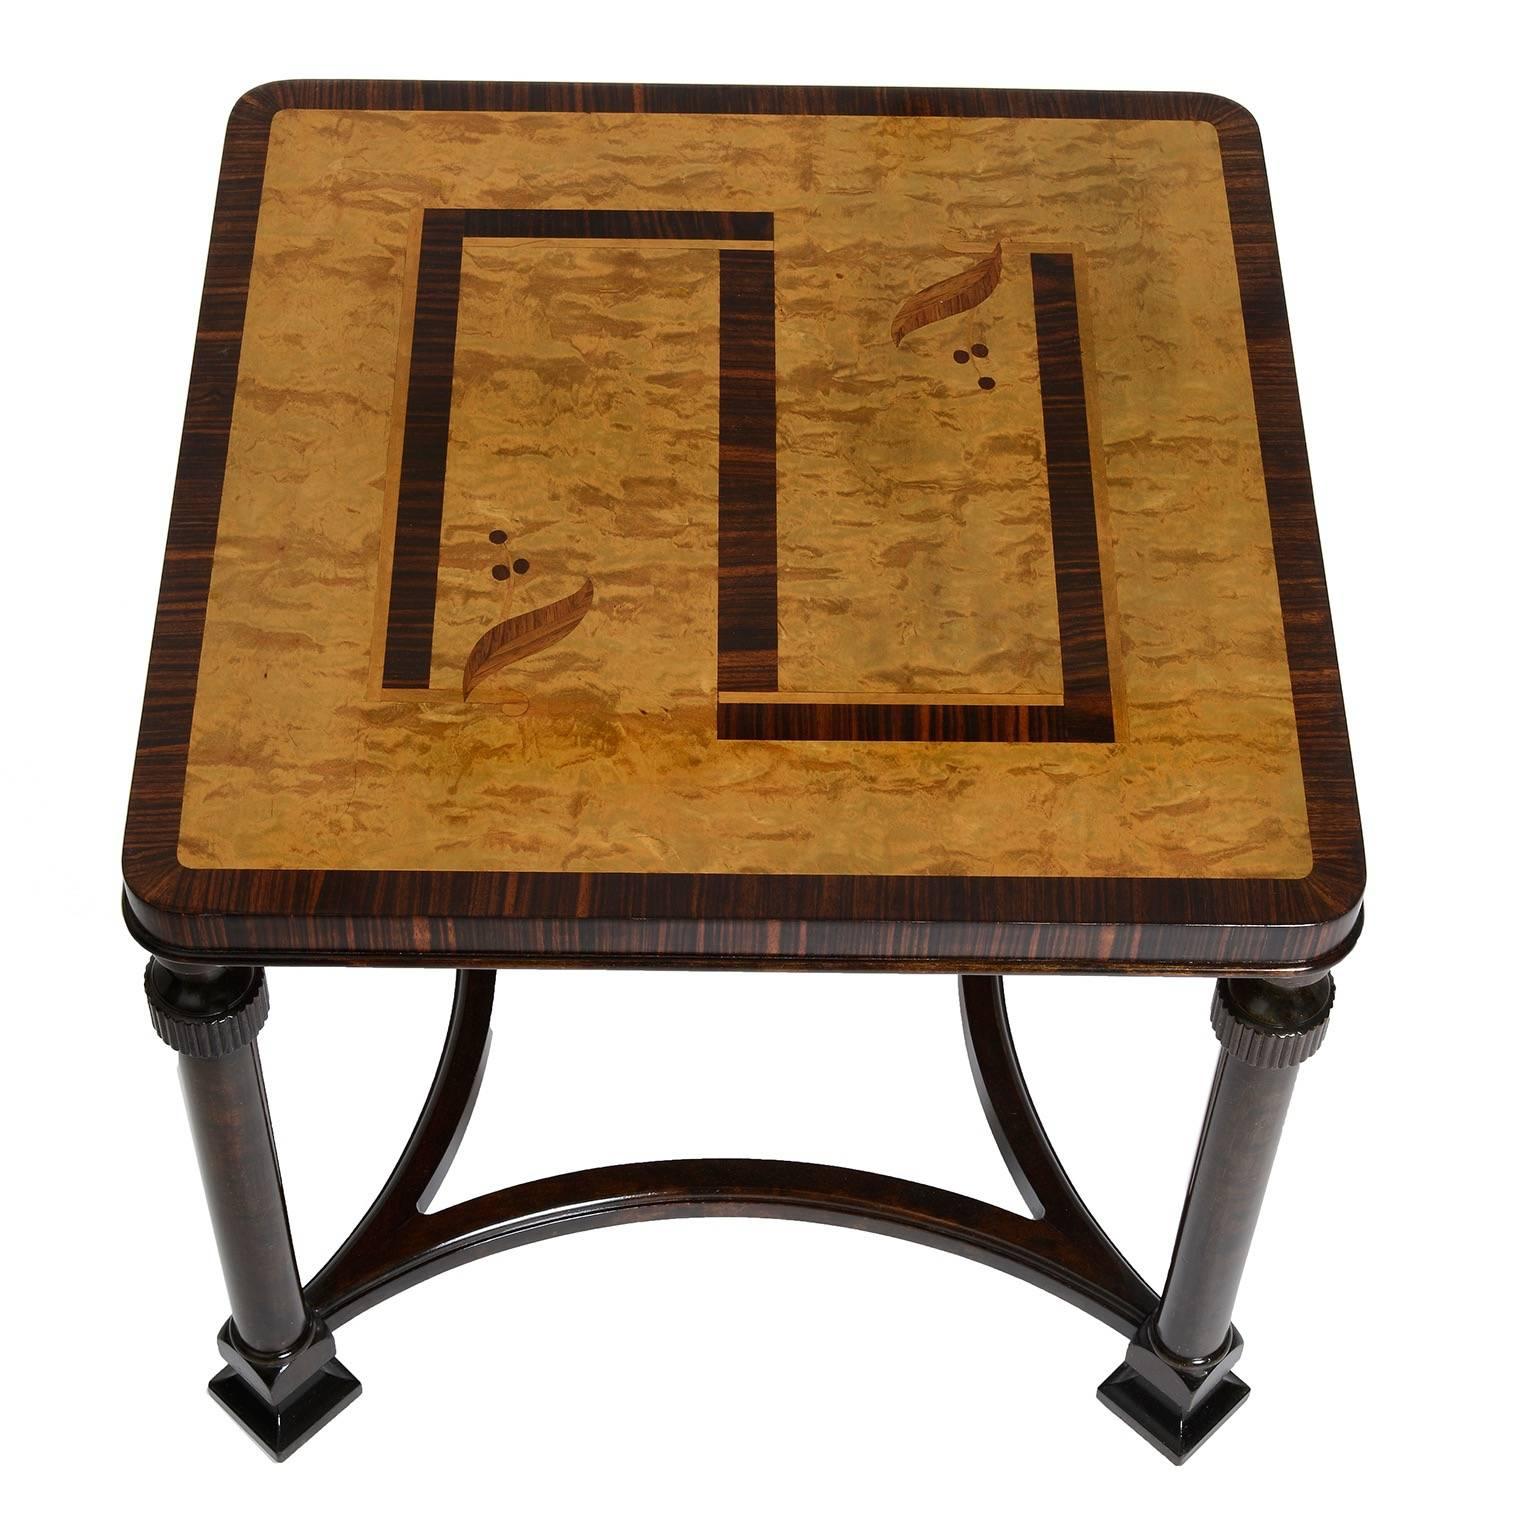 A Swedish Art Deco (Swedish Grace) side table, circa 1930s, the square geometric and foliate inlaid birch top with a palisander crossbanding, raised on circular turned legs joined by an open concave quadripartite stretcher ending with block feet.